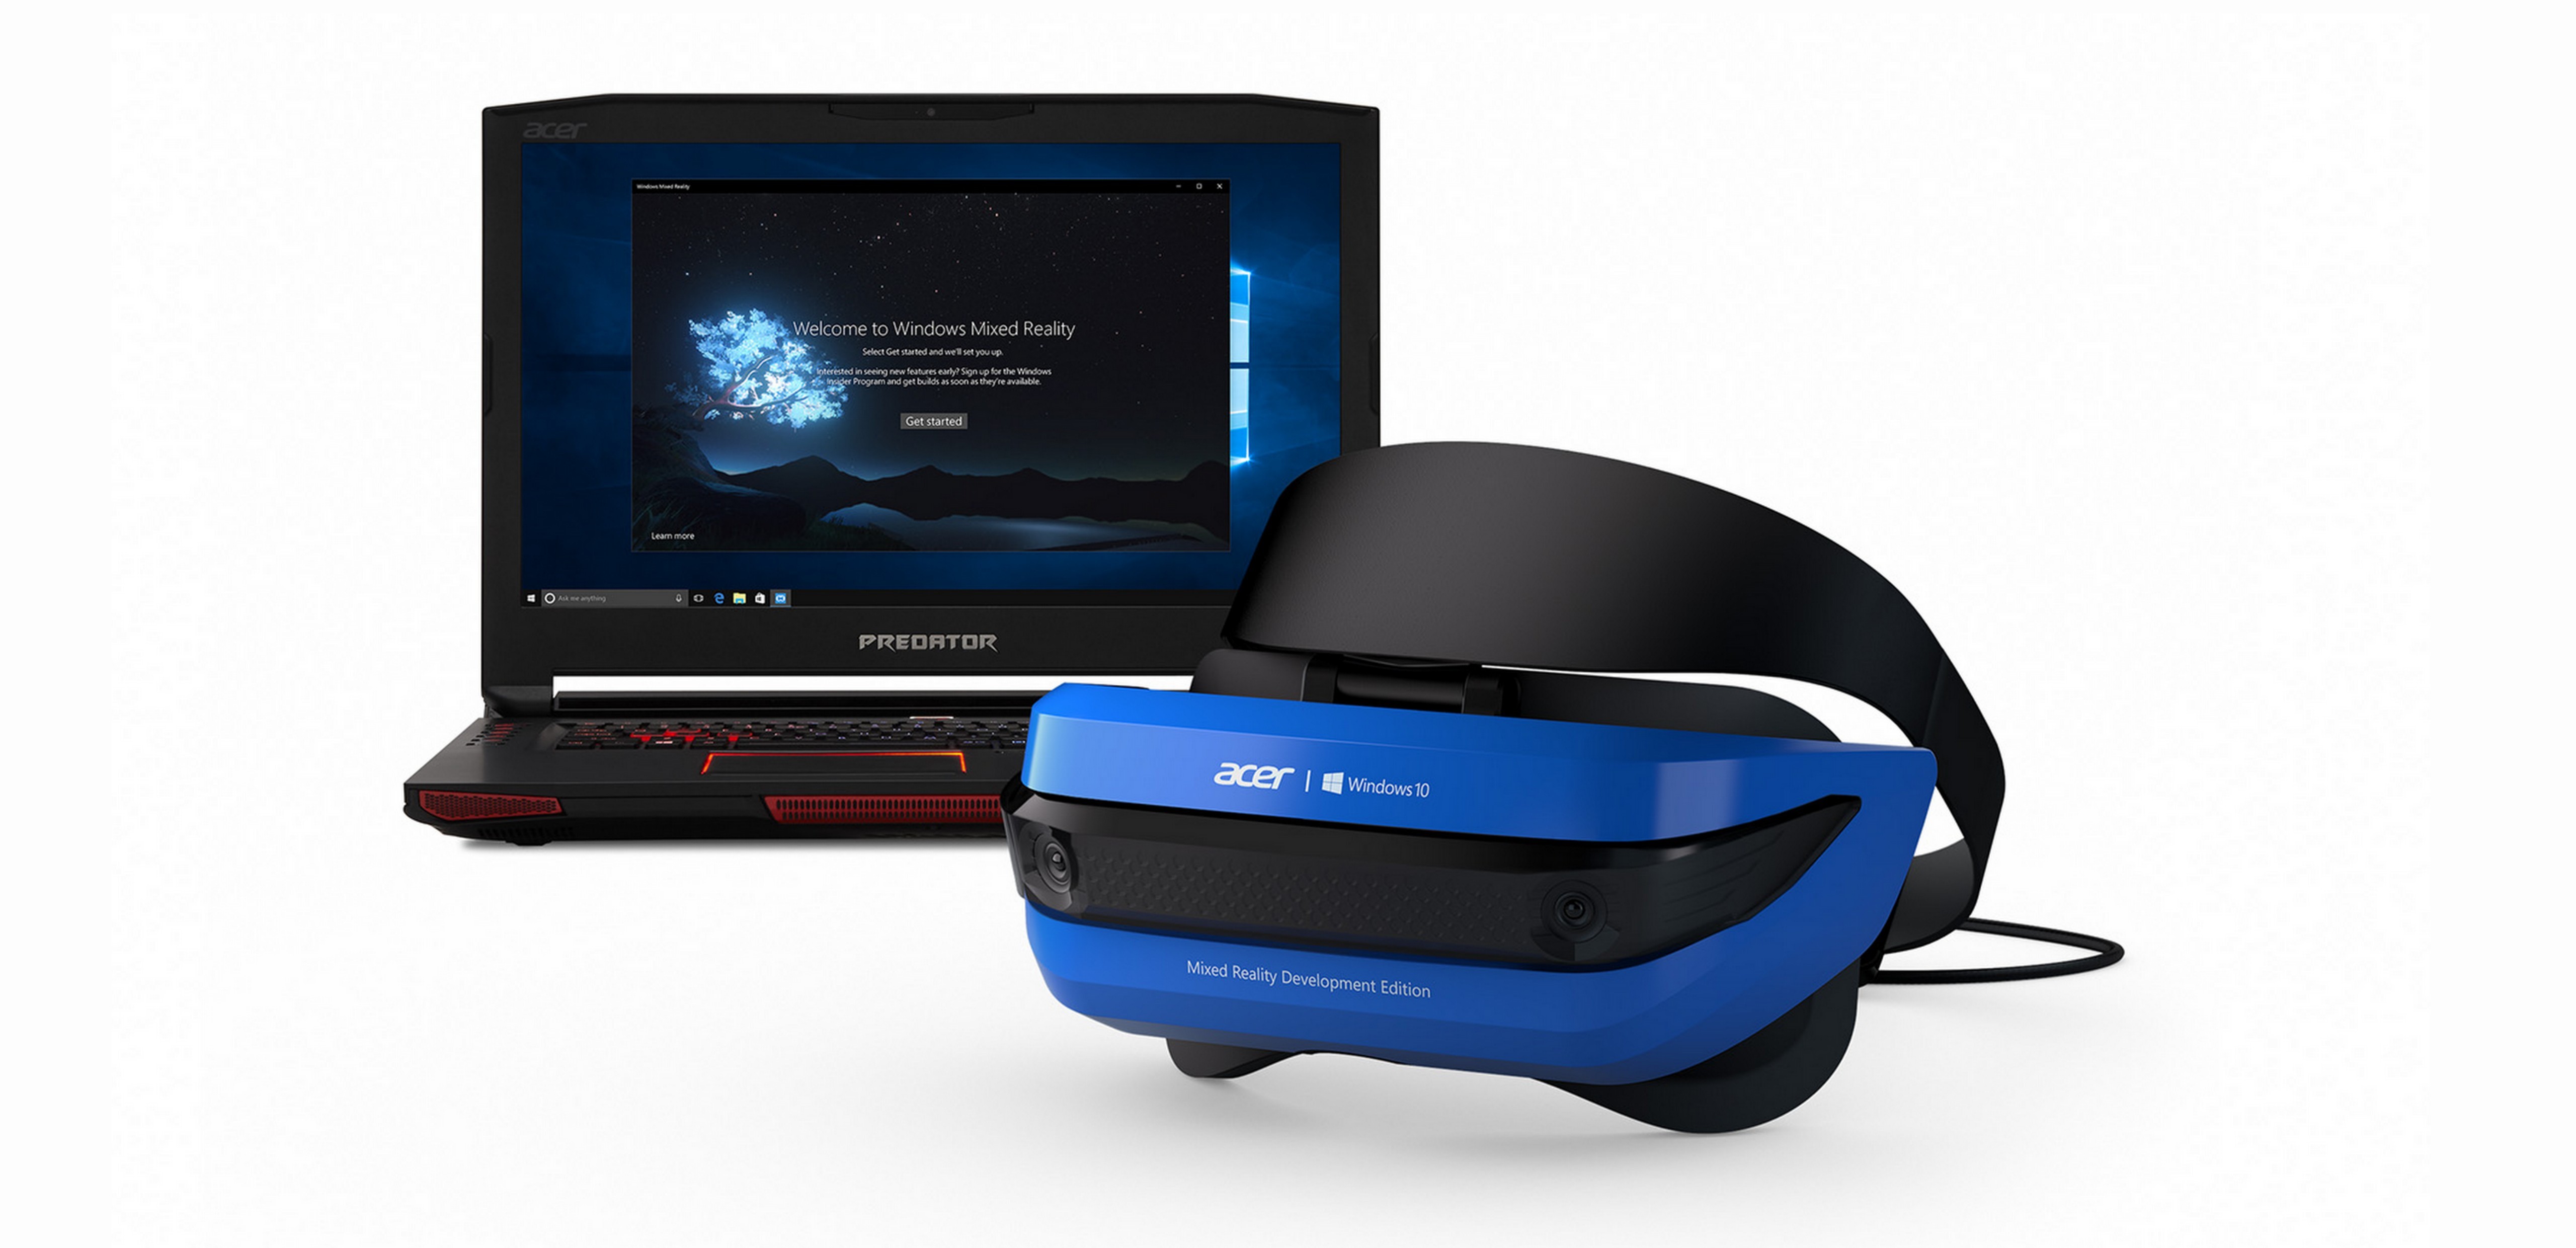 Acer Windows Mixed Reality Development Edition headset